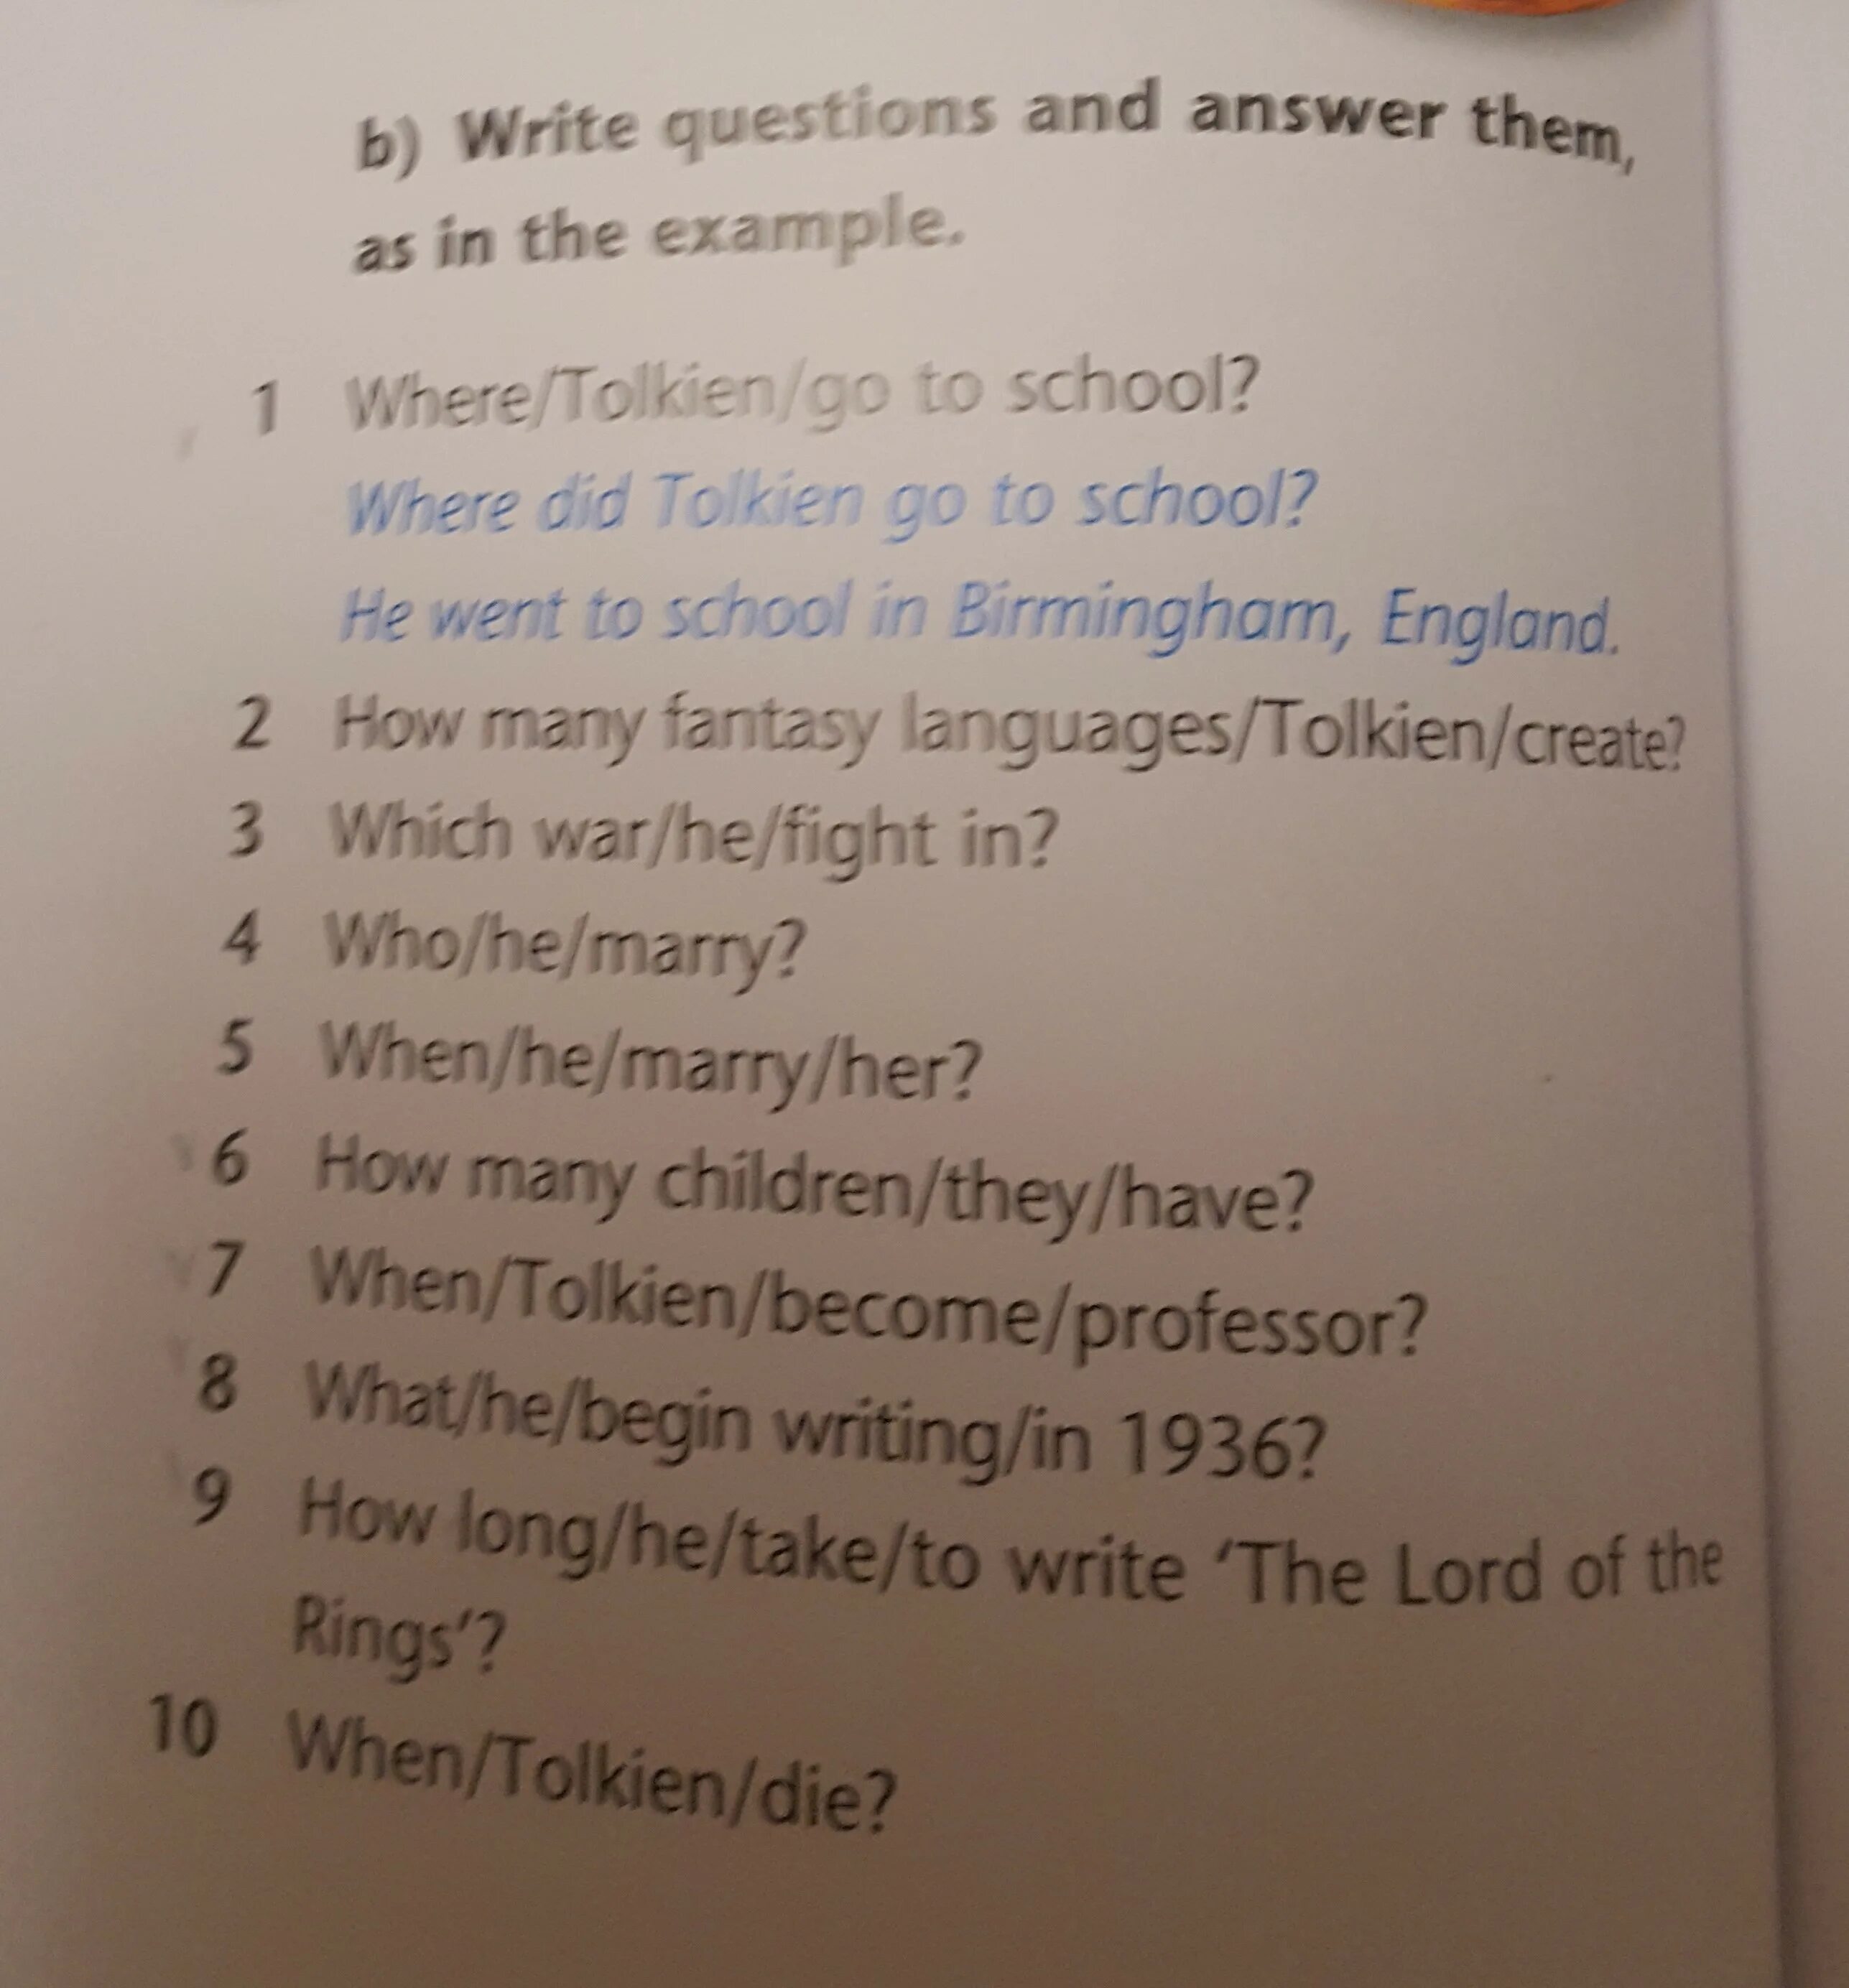 Answer the questions what do the children. Write questions.answer them. Answer the questions ответы на вопросы. Write questions and answers as in the example ответы. Write questions and short answers as in the example второй класс английский язык.